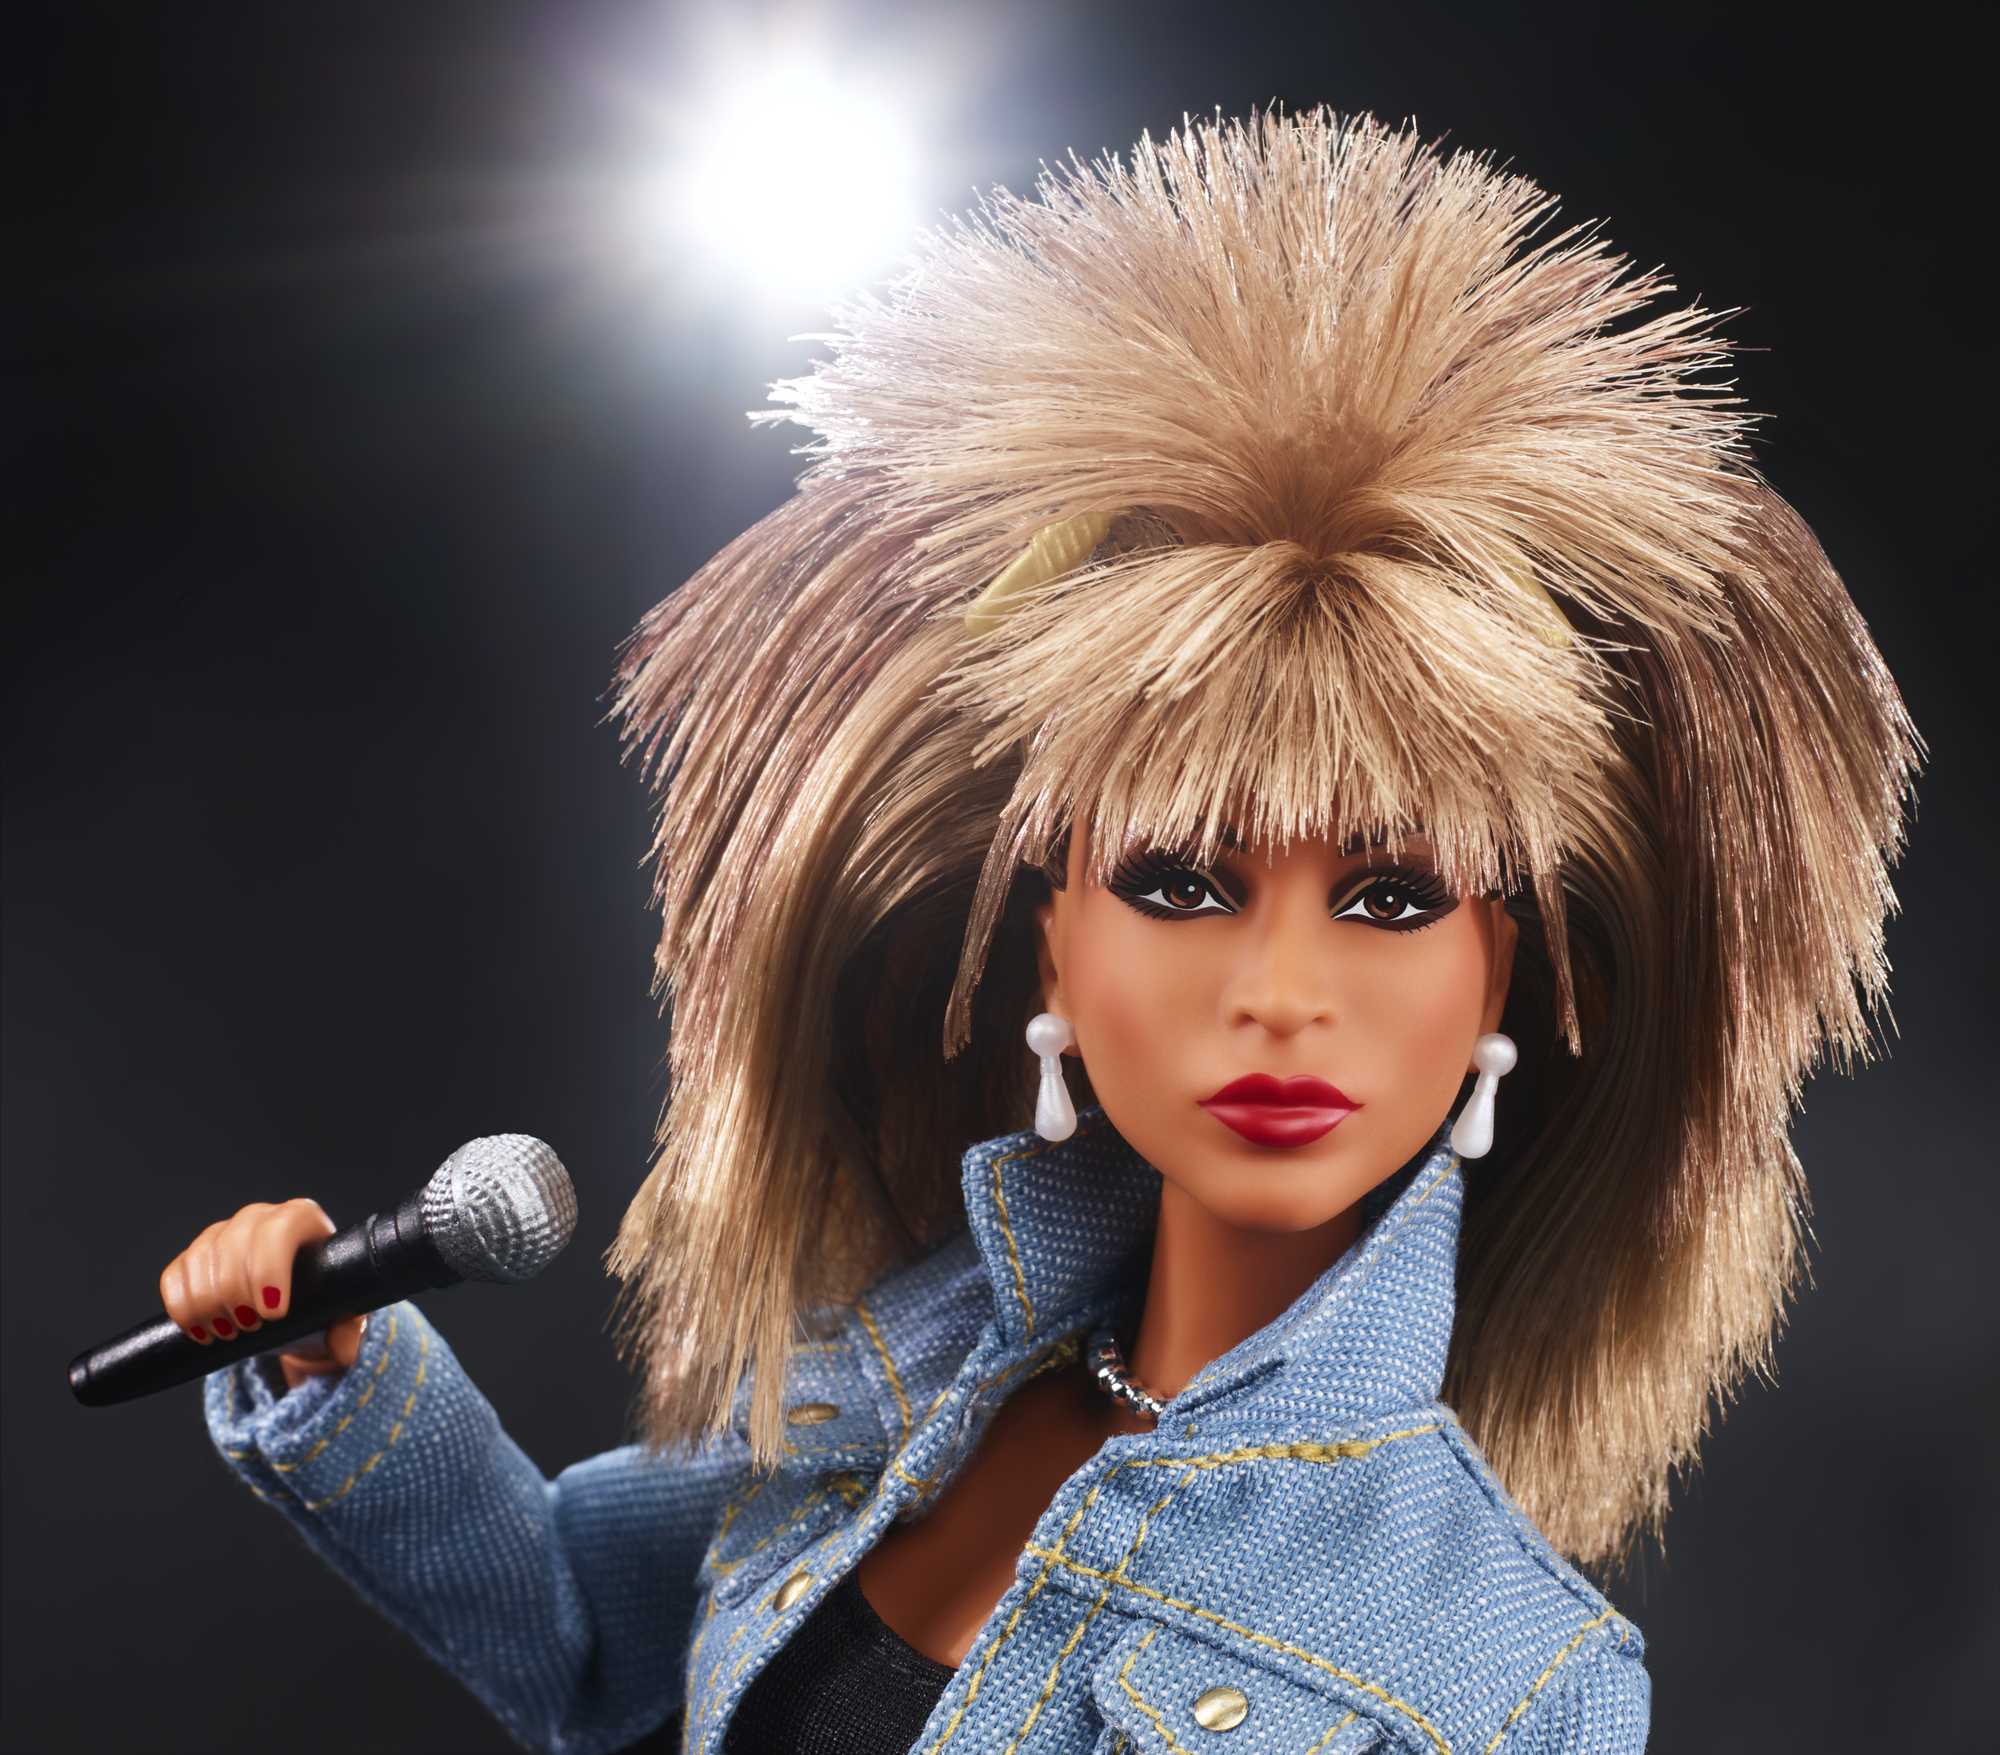 Barbie Signature Tina Turner Barbie Doll in ‘90s Fashion, Gift for Collectors - image 4 of 7